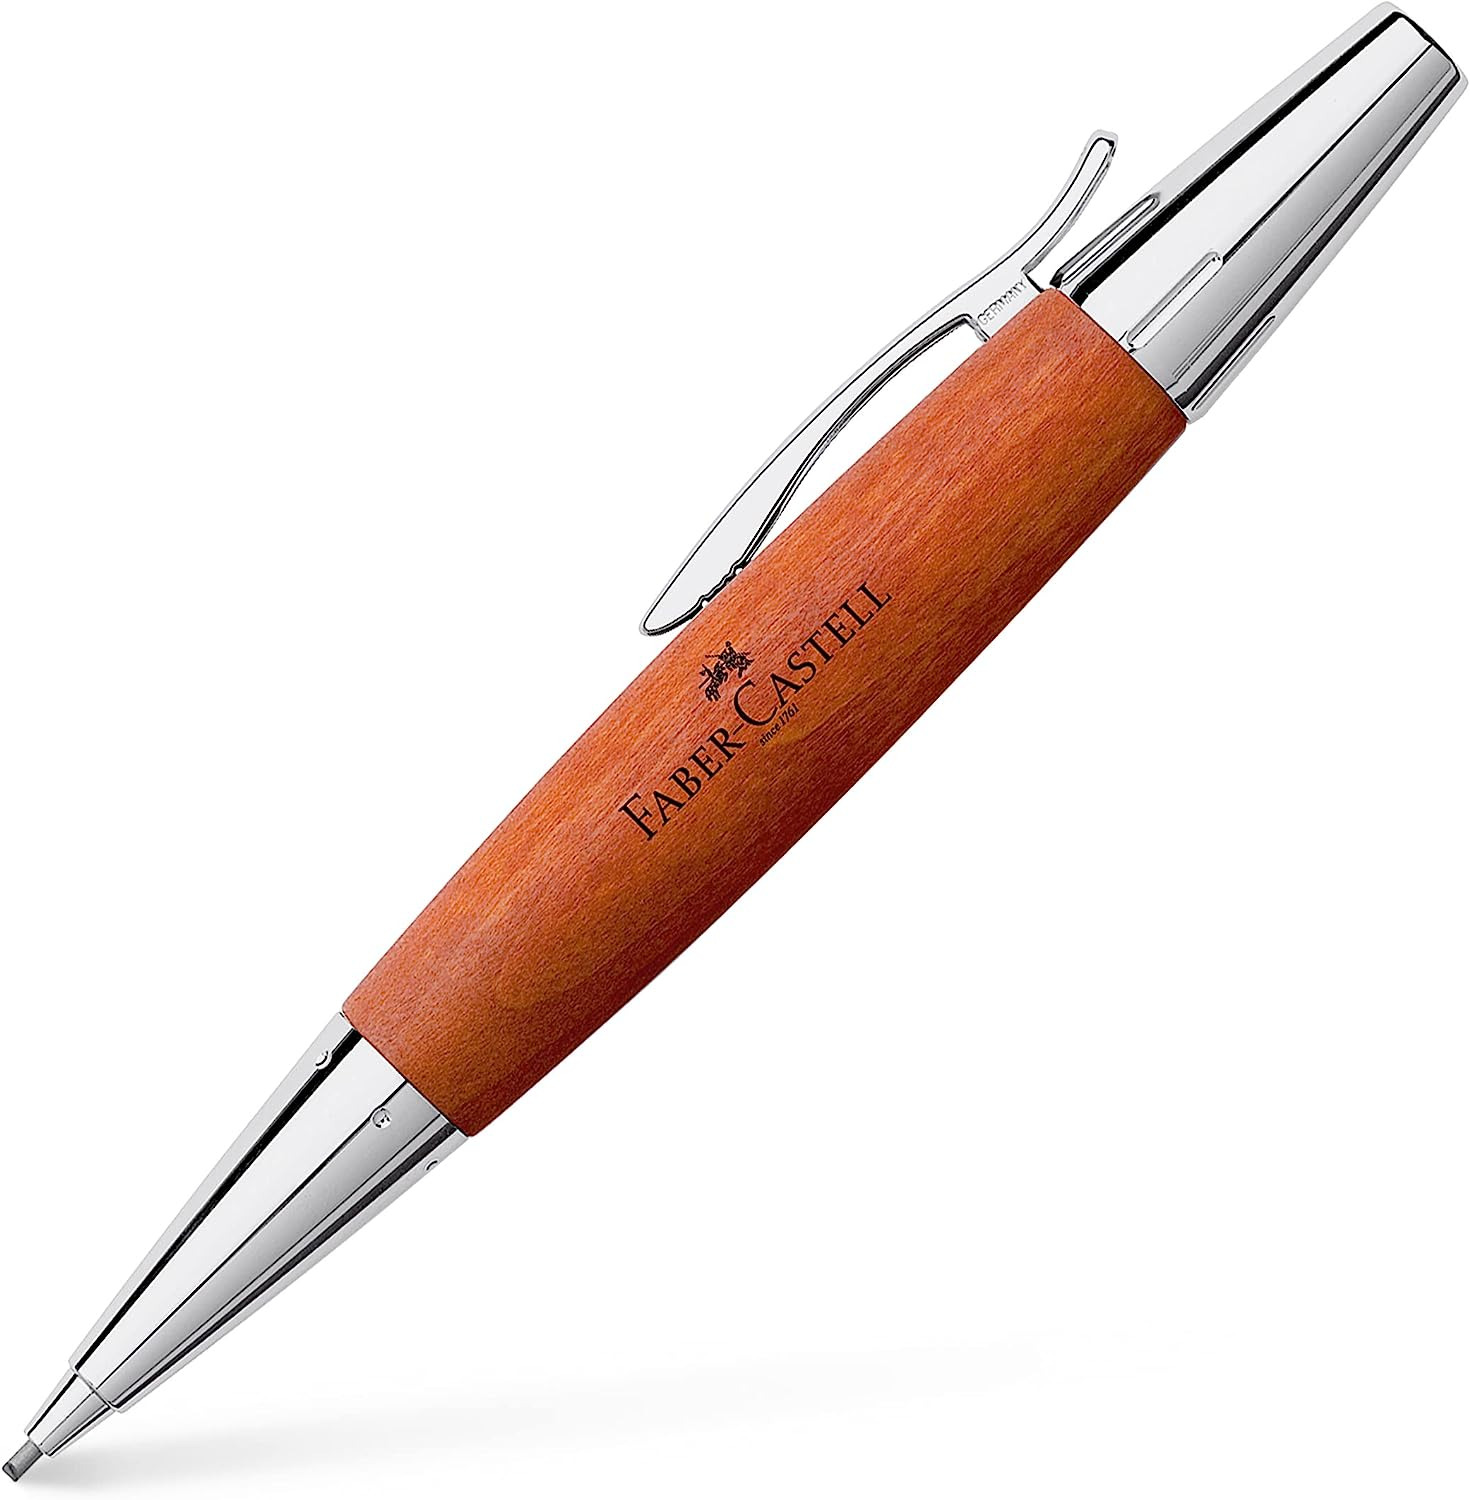 Faber Castell 138382 Emotion Mechanical Pencil, Wood & Chrome, Pear Tree, Brown,